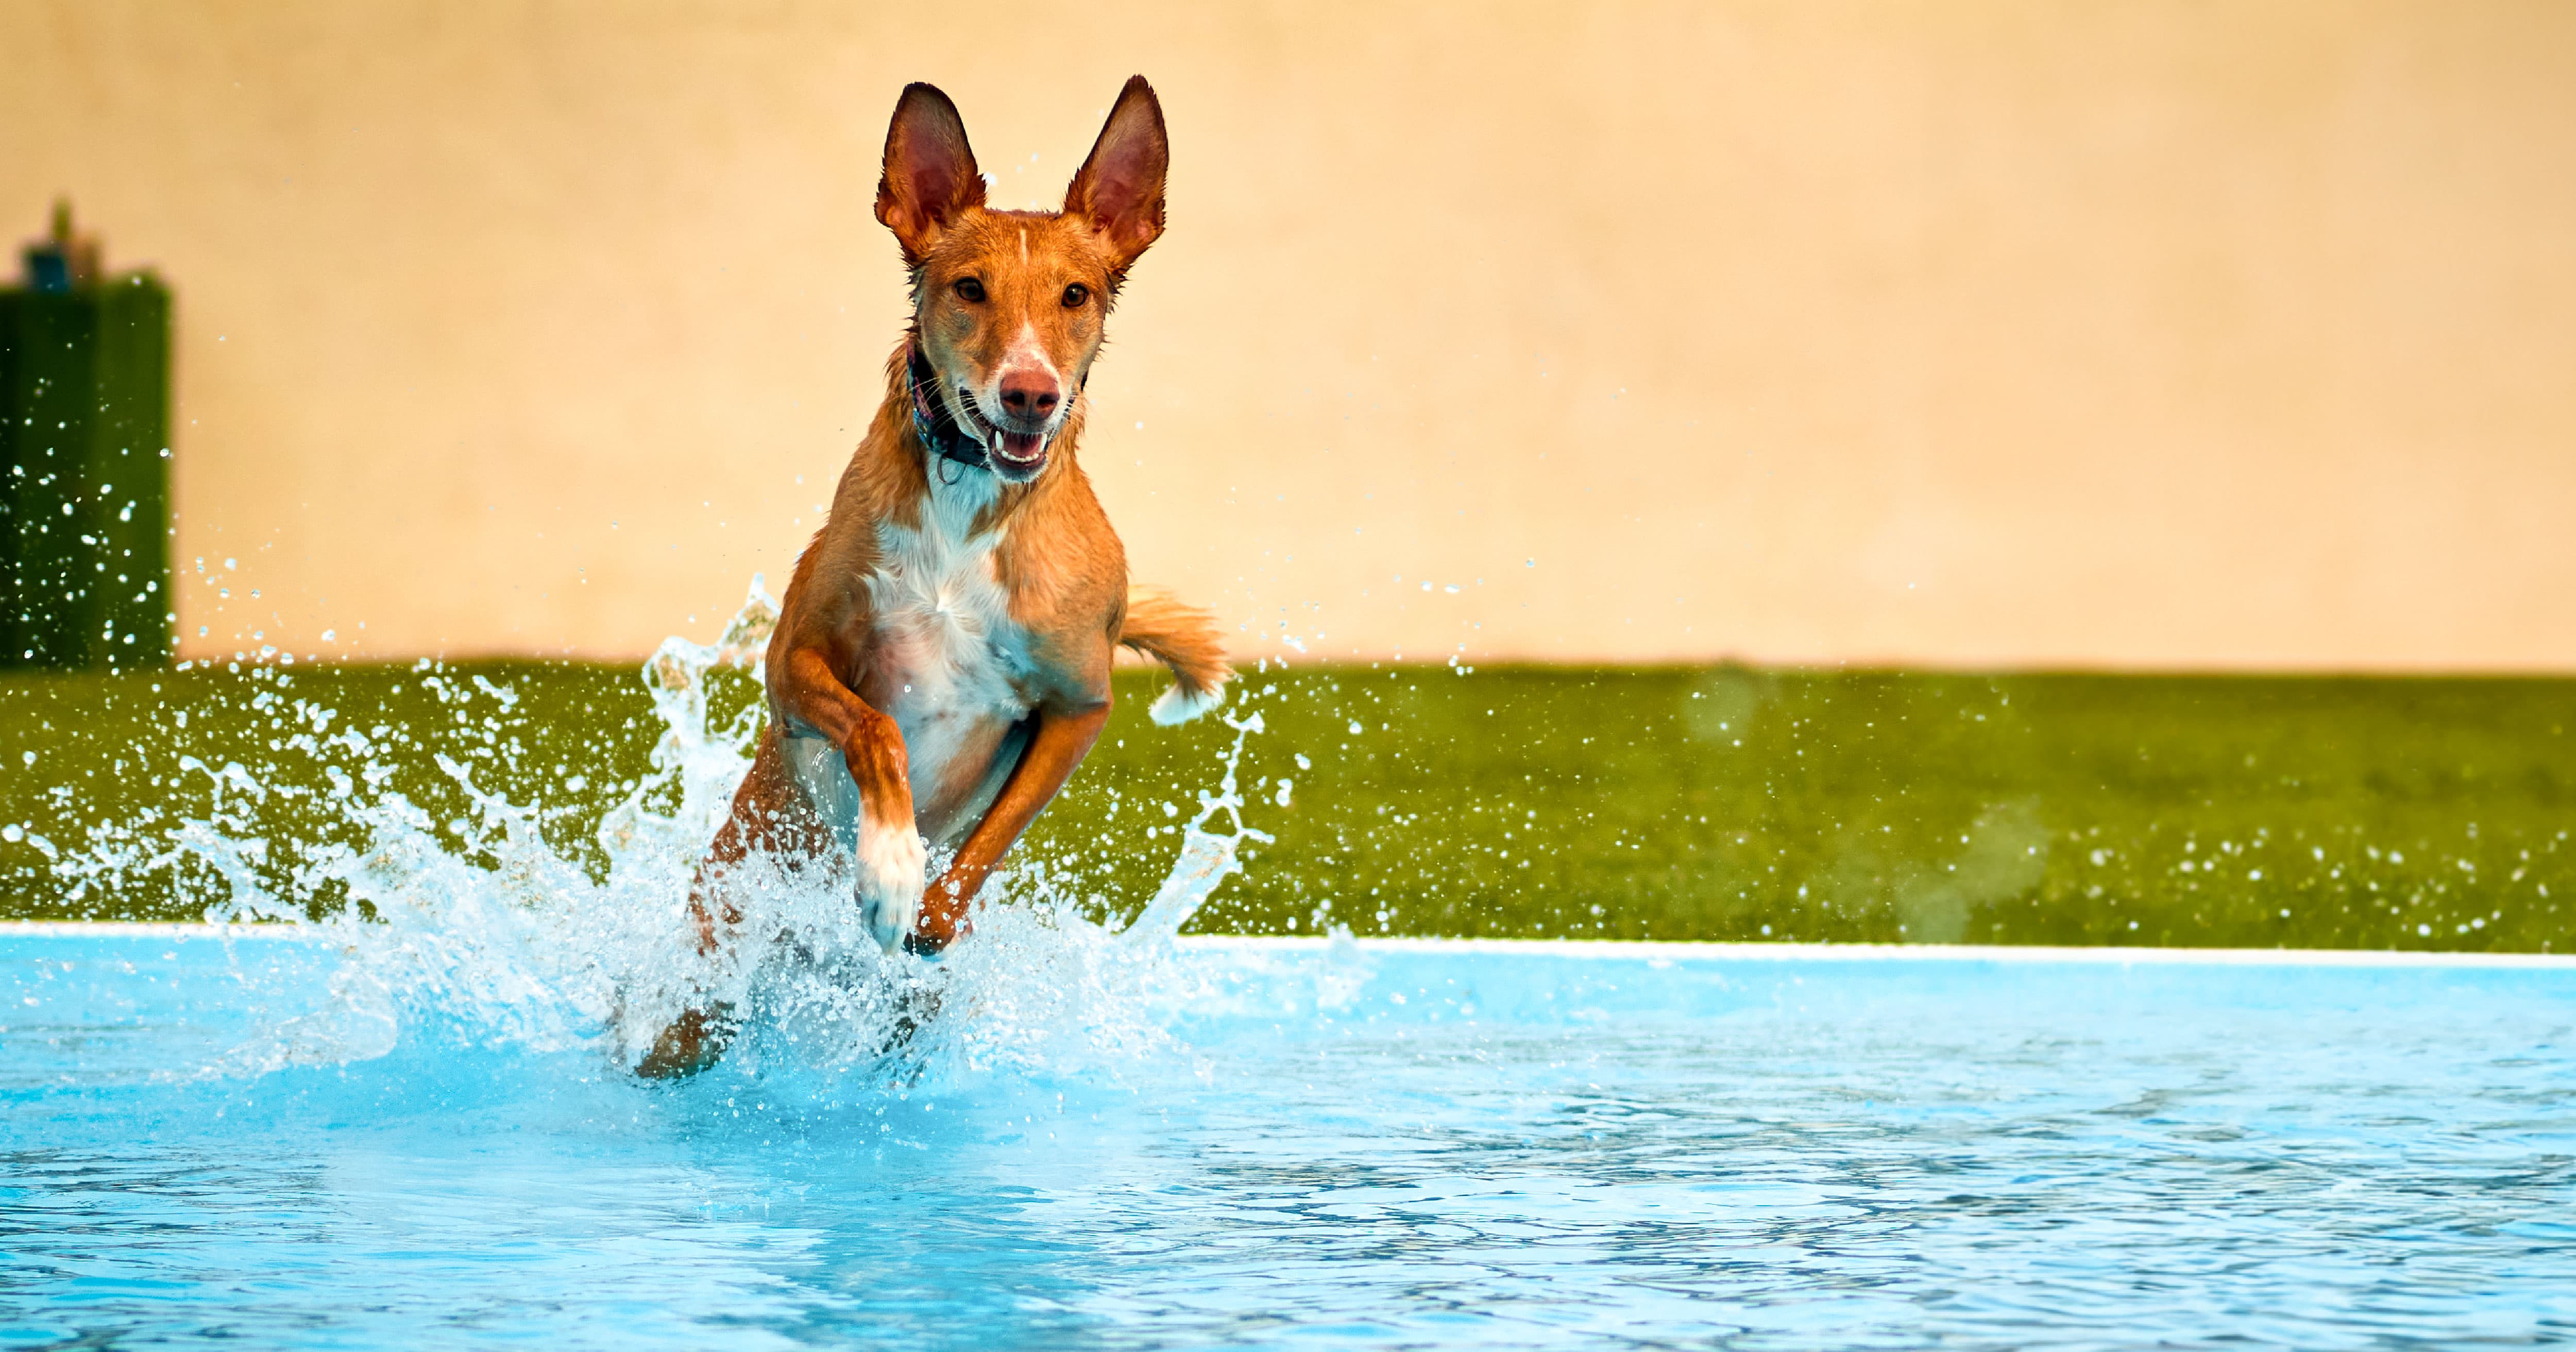 A dog jumping through a shallow pool of water.